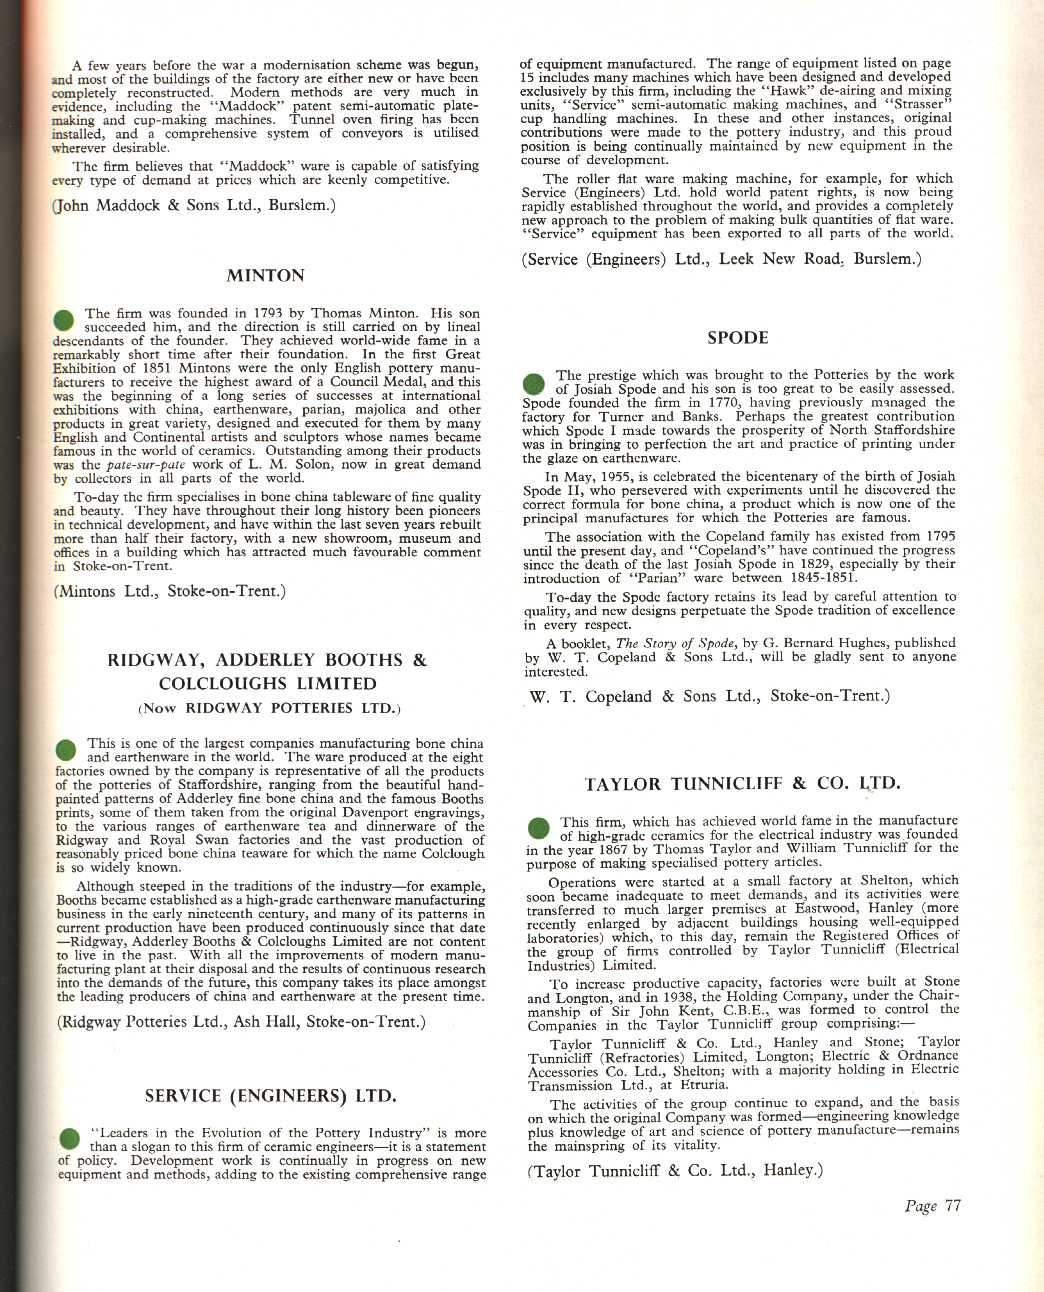 A guide to some of the leading firms of North Staffordshire, Minton, Ridgway, Adderley Booths & Colcloughs Limited, Service (Engineers) Ltd, Spode, Taylor Tunnicliff & Co. Ltd.